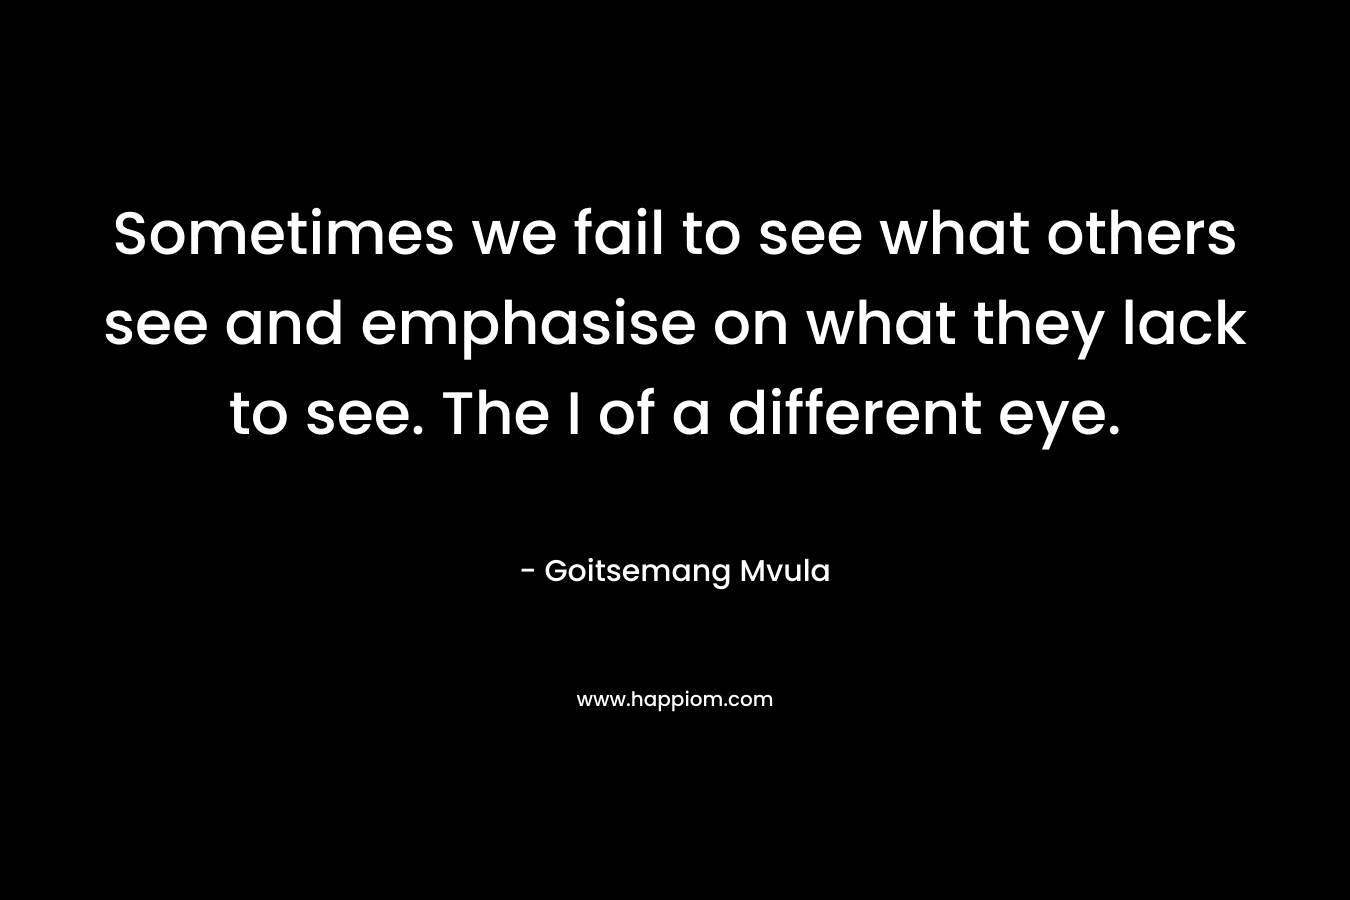 Sometimes we fail to see what others see and emphasise on what they lack to see. The I of a different eye.